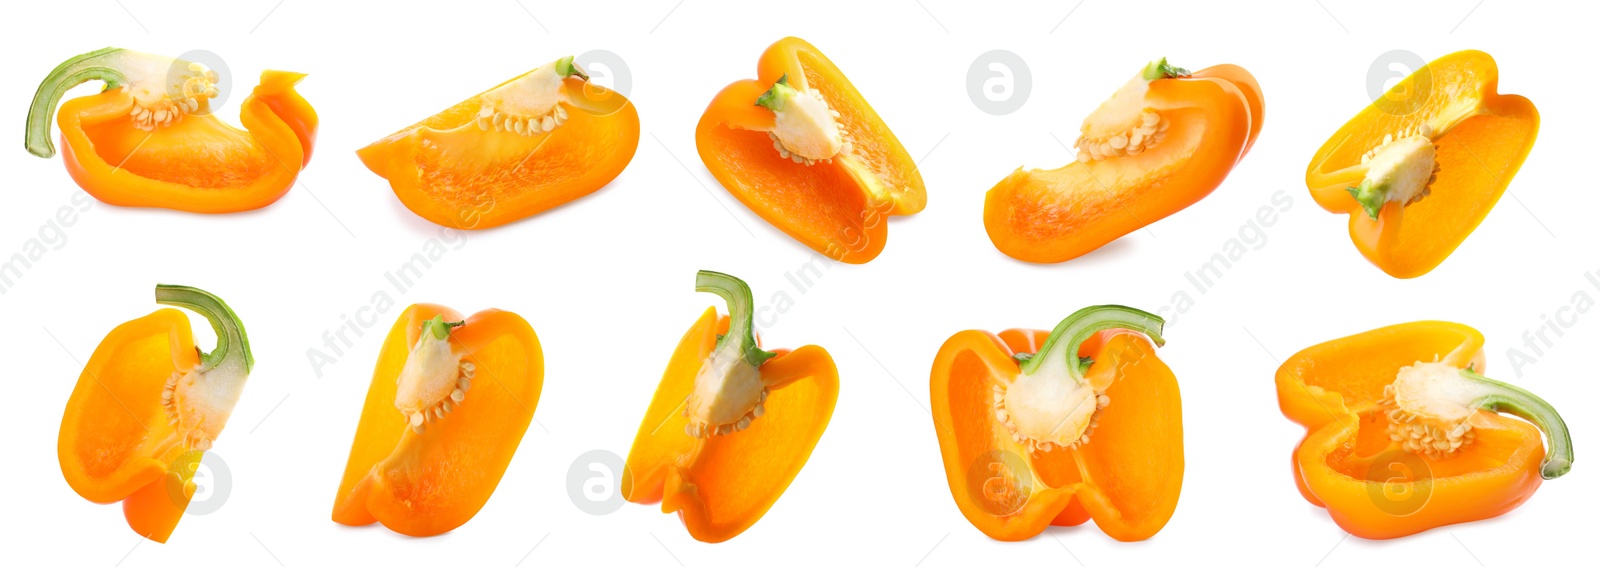 Image of Set of cut ripe orange bell peppers on white background